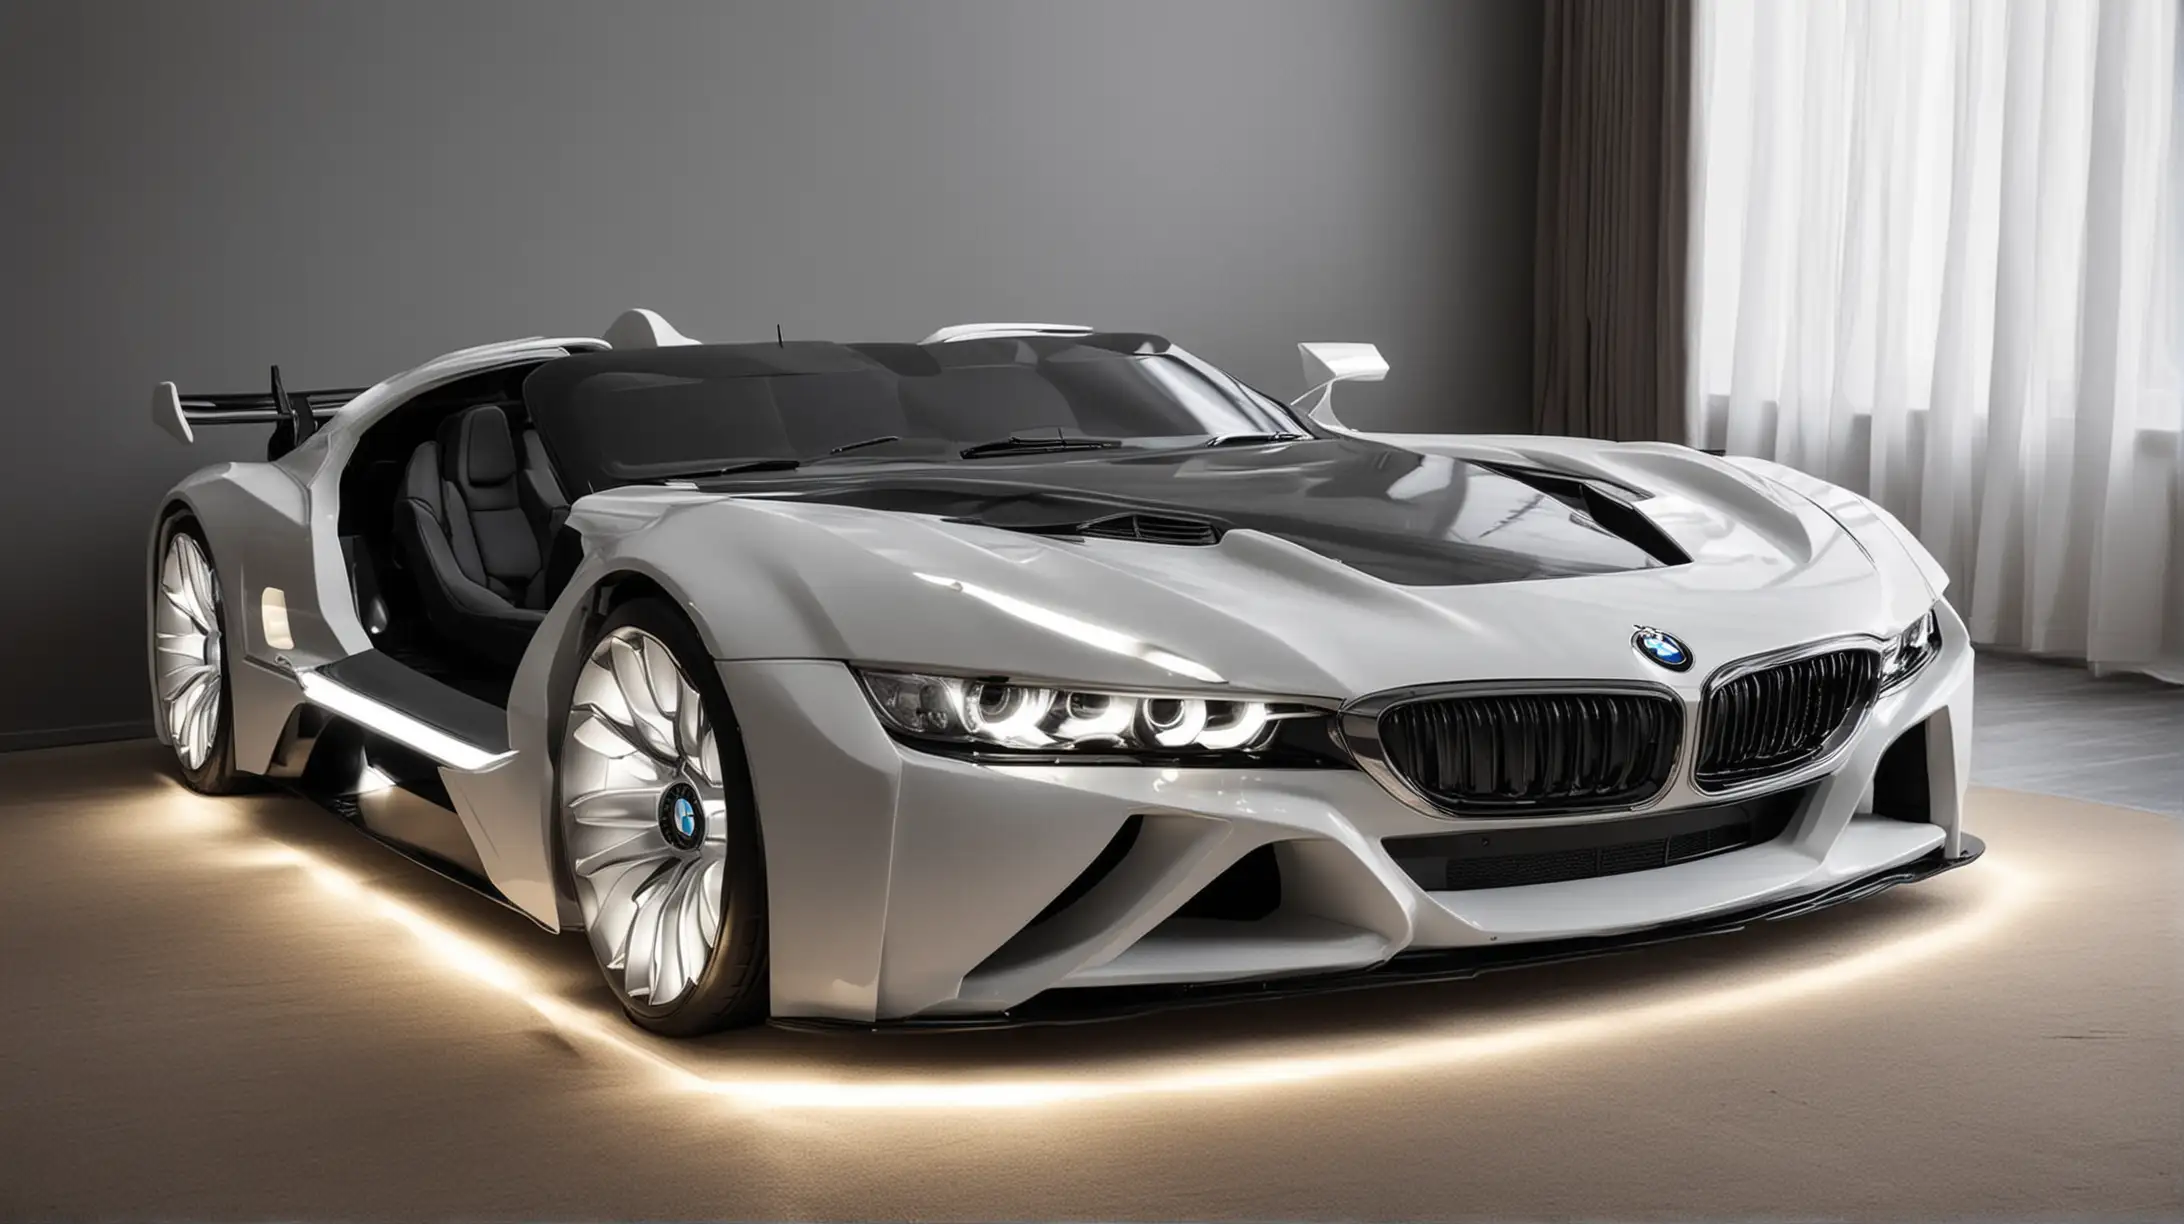 Luxurious BMWInspired Supercar Bed with Illuminated Headlights